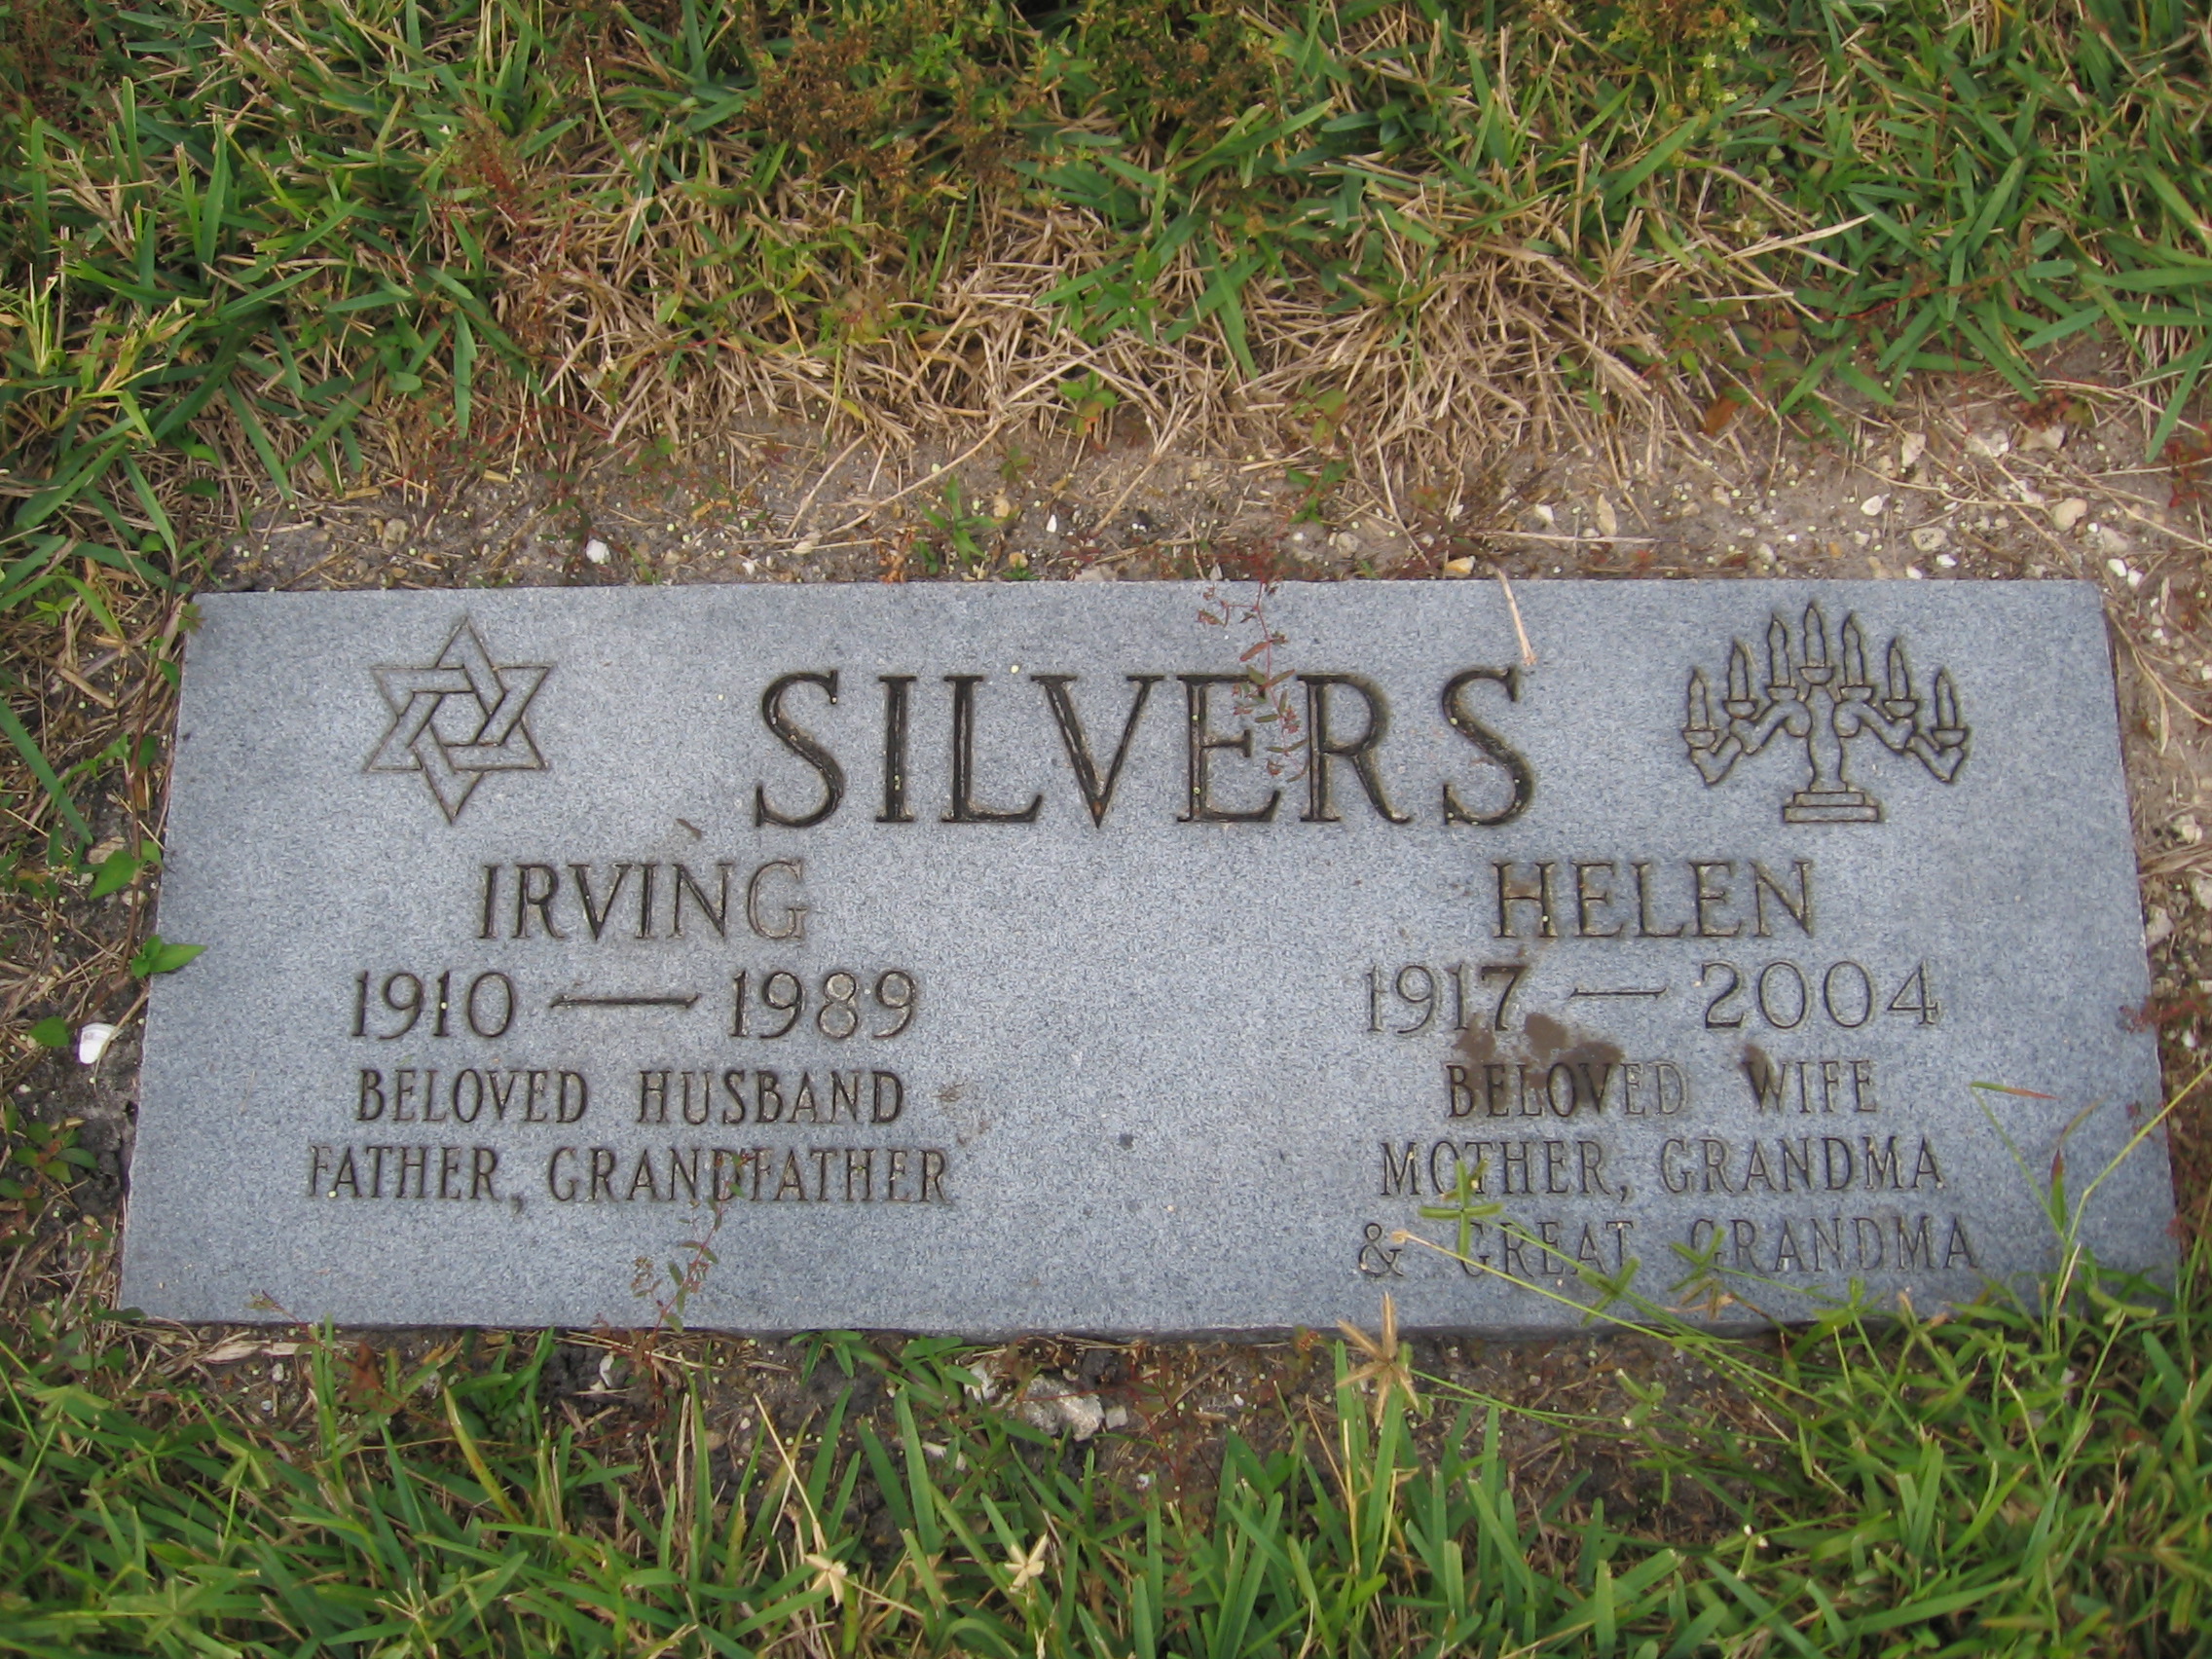 Irving Silvers